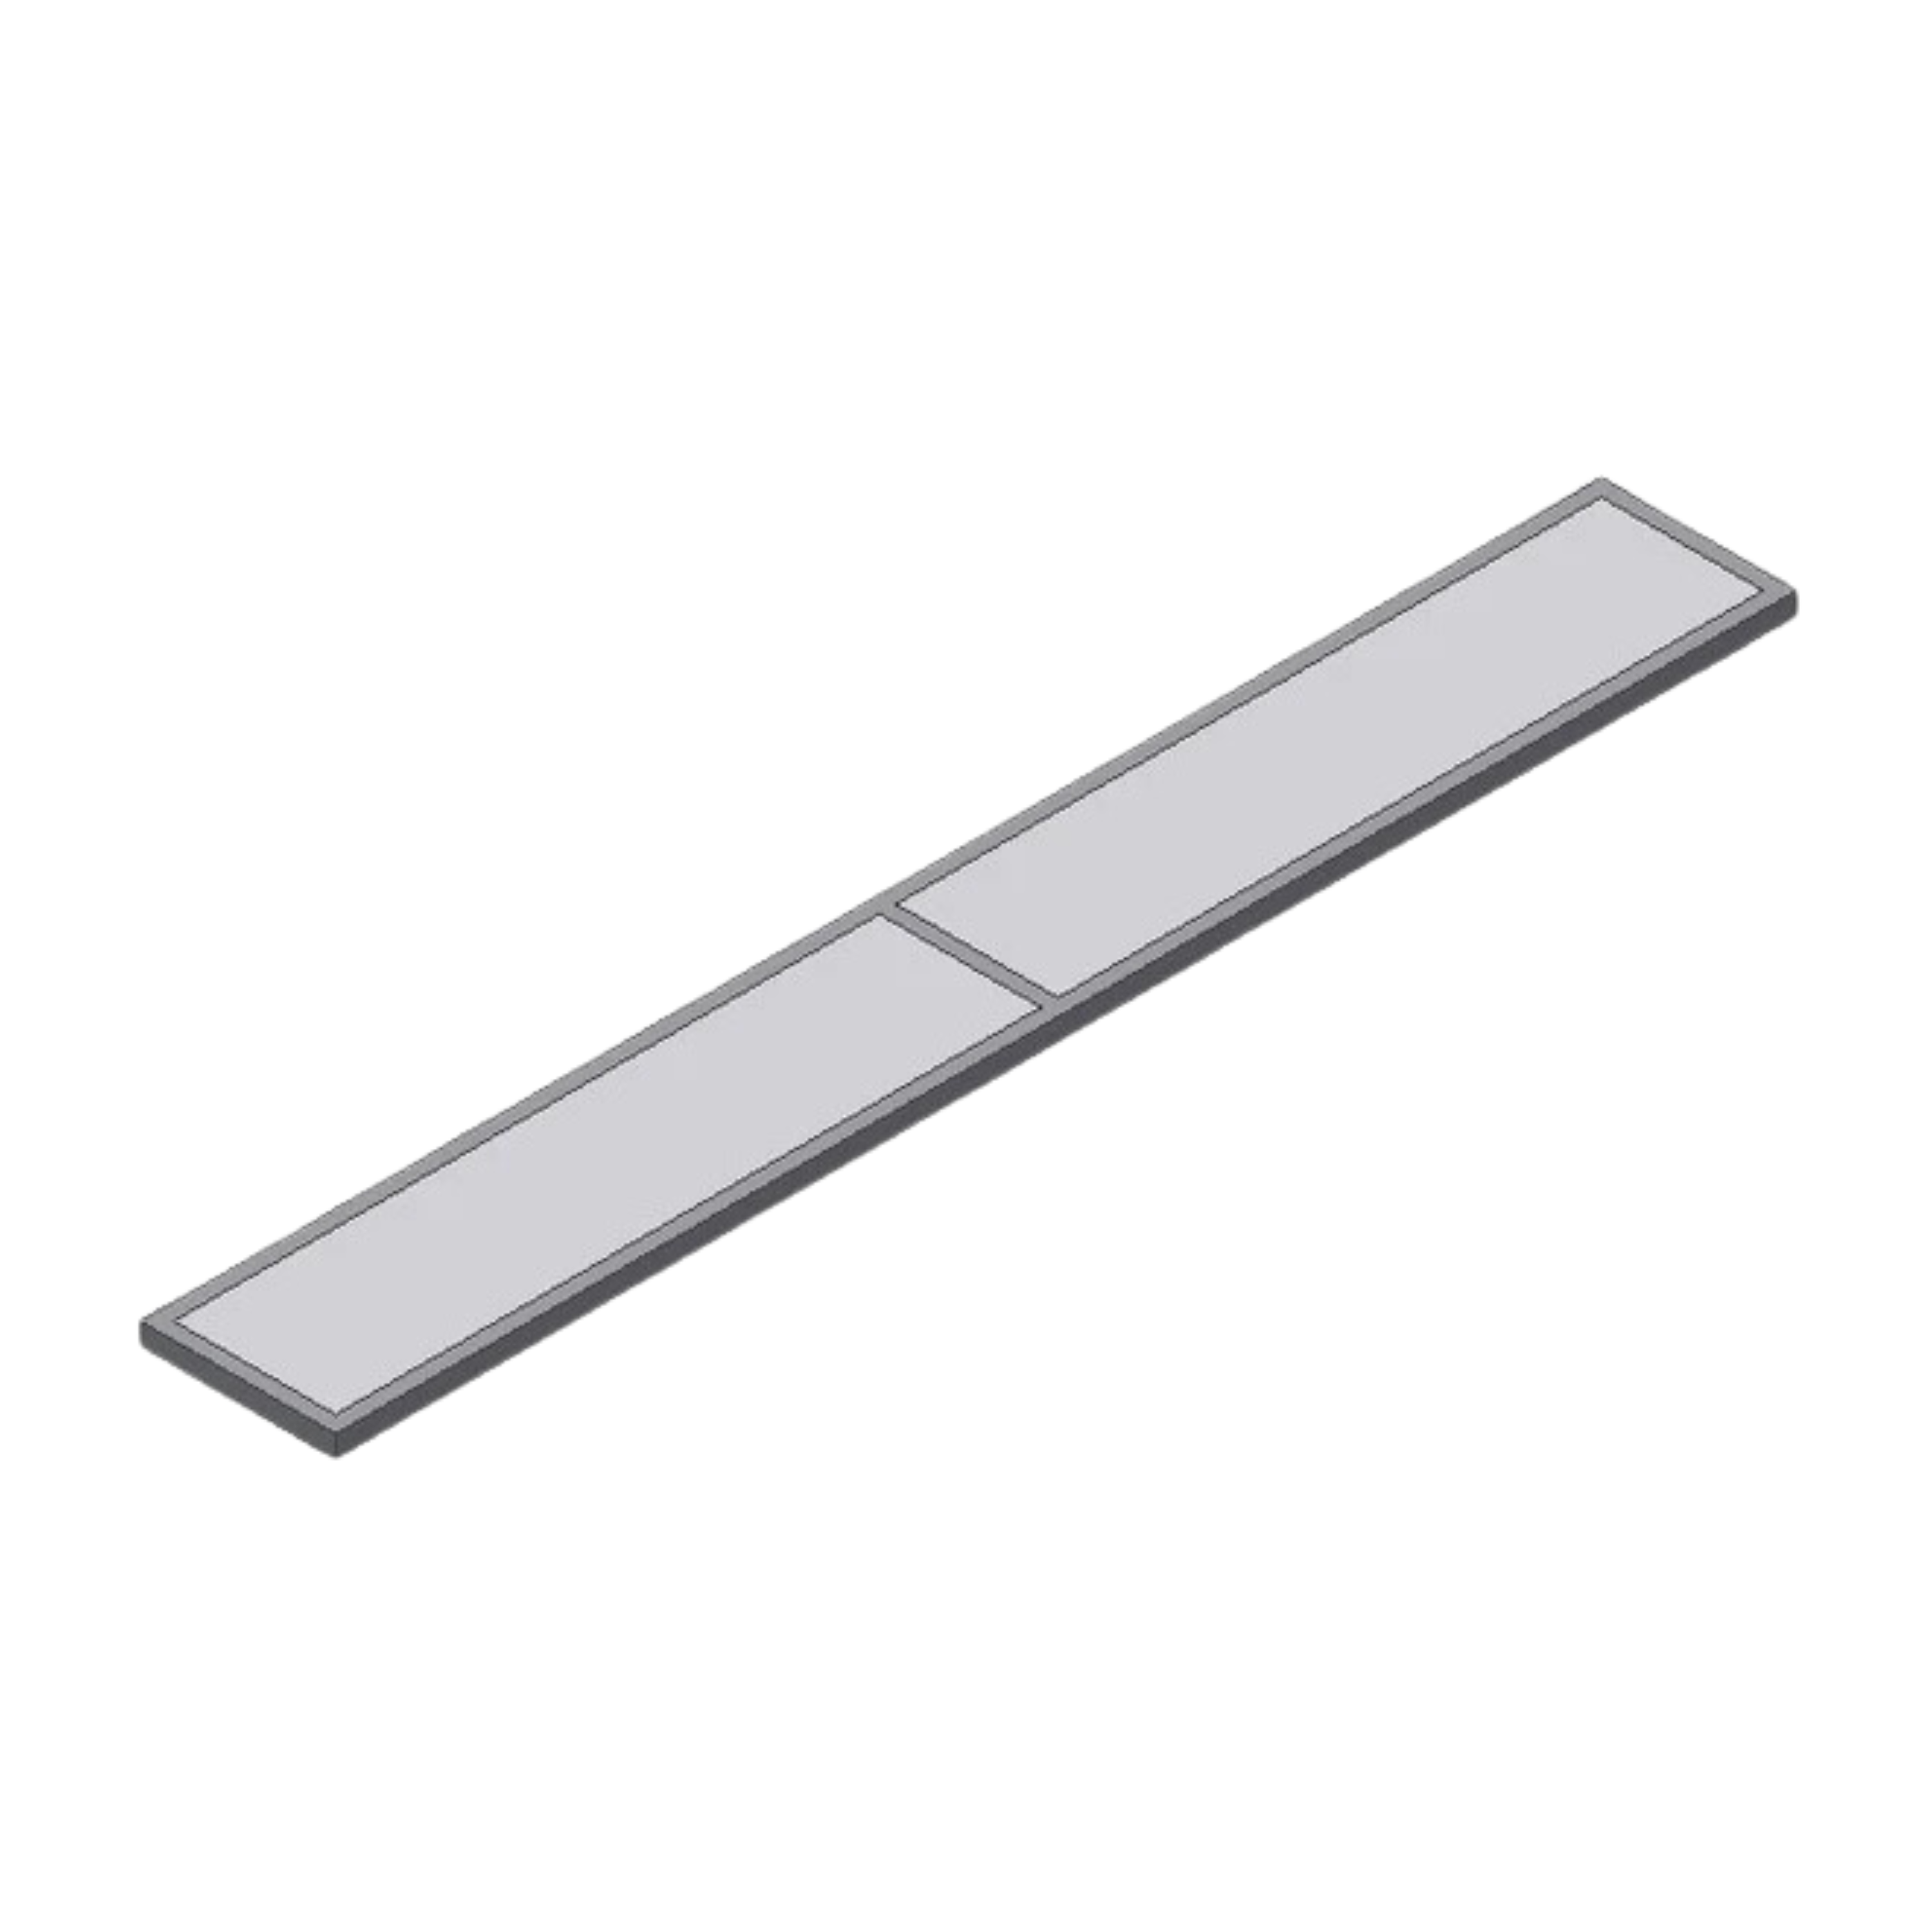 Ceiling element narrow, size 351 x 2624 mm